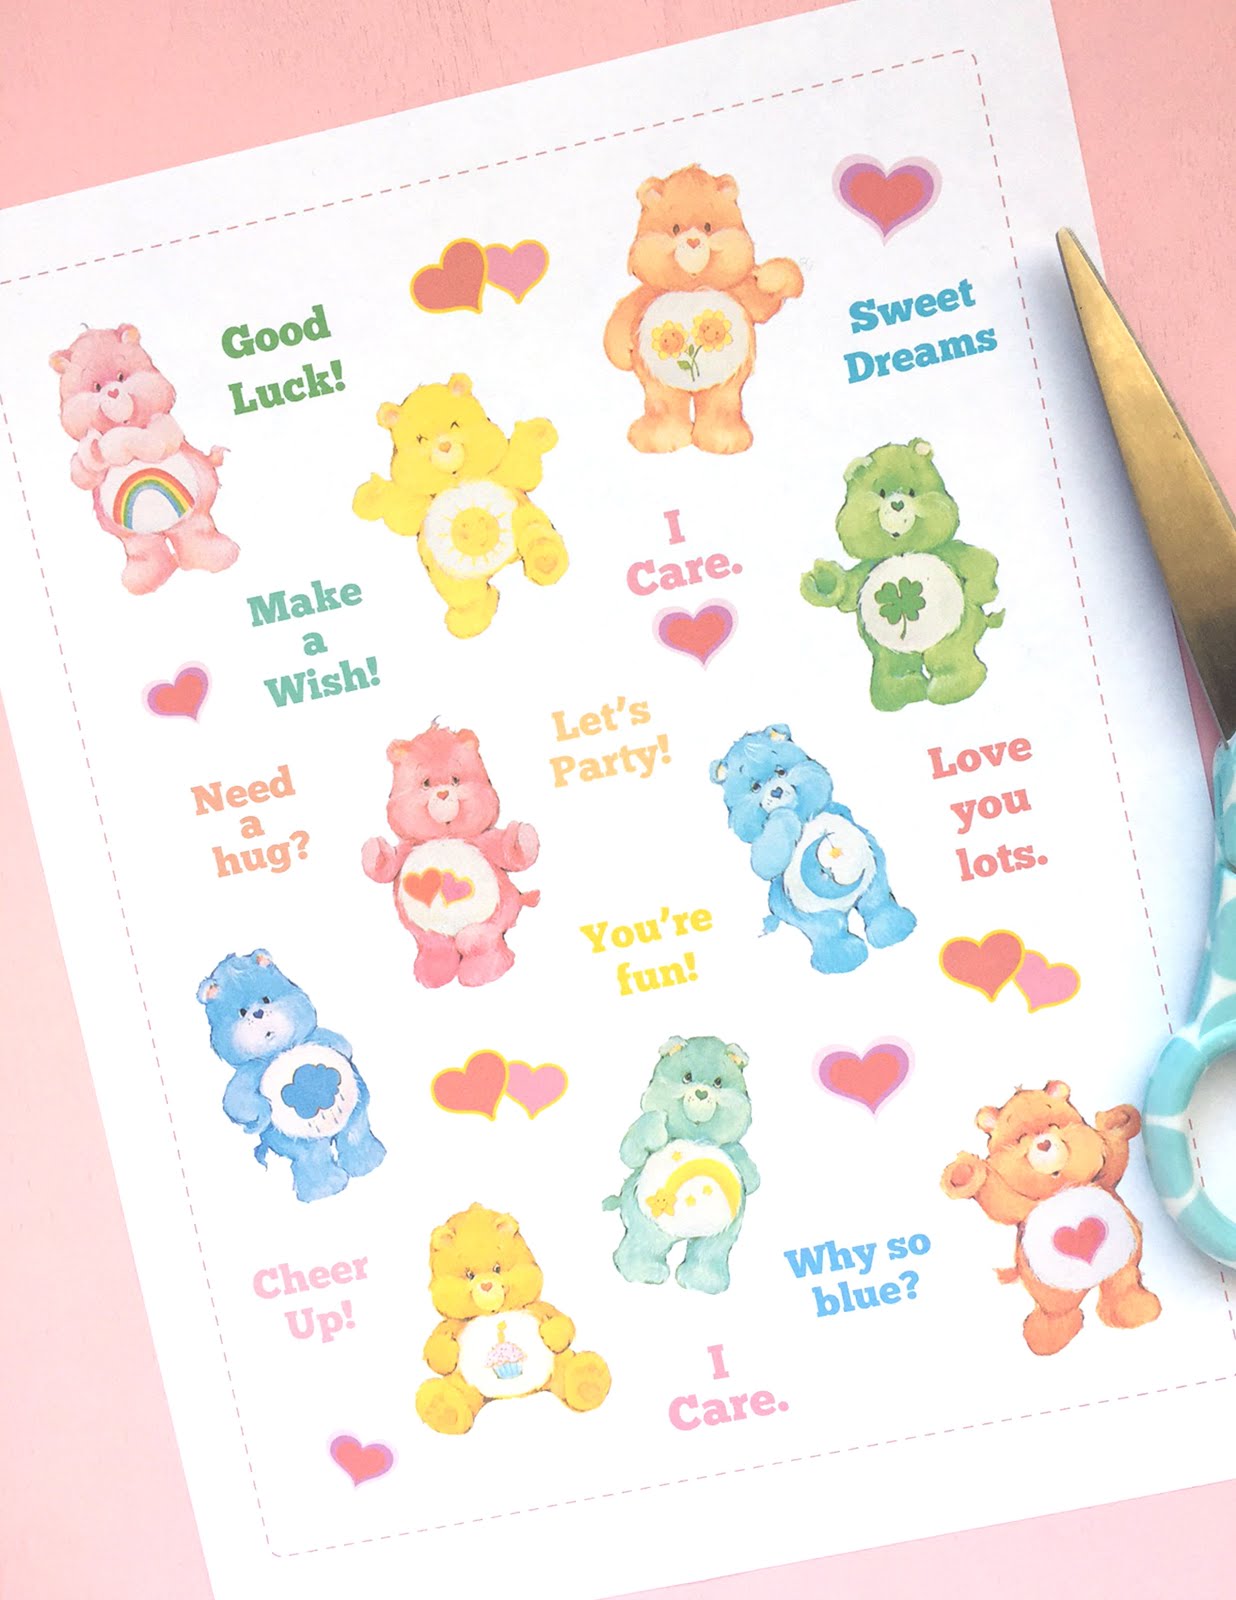 amy j. delightful blog: Free Printable Stickers to Cheer You!